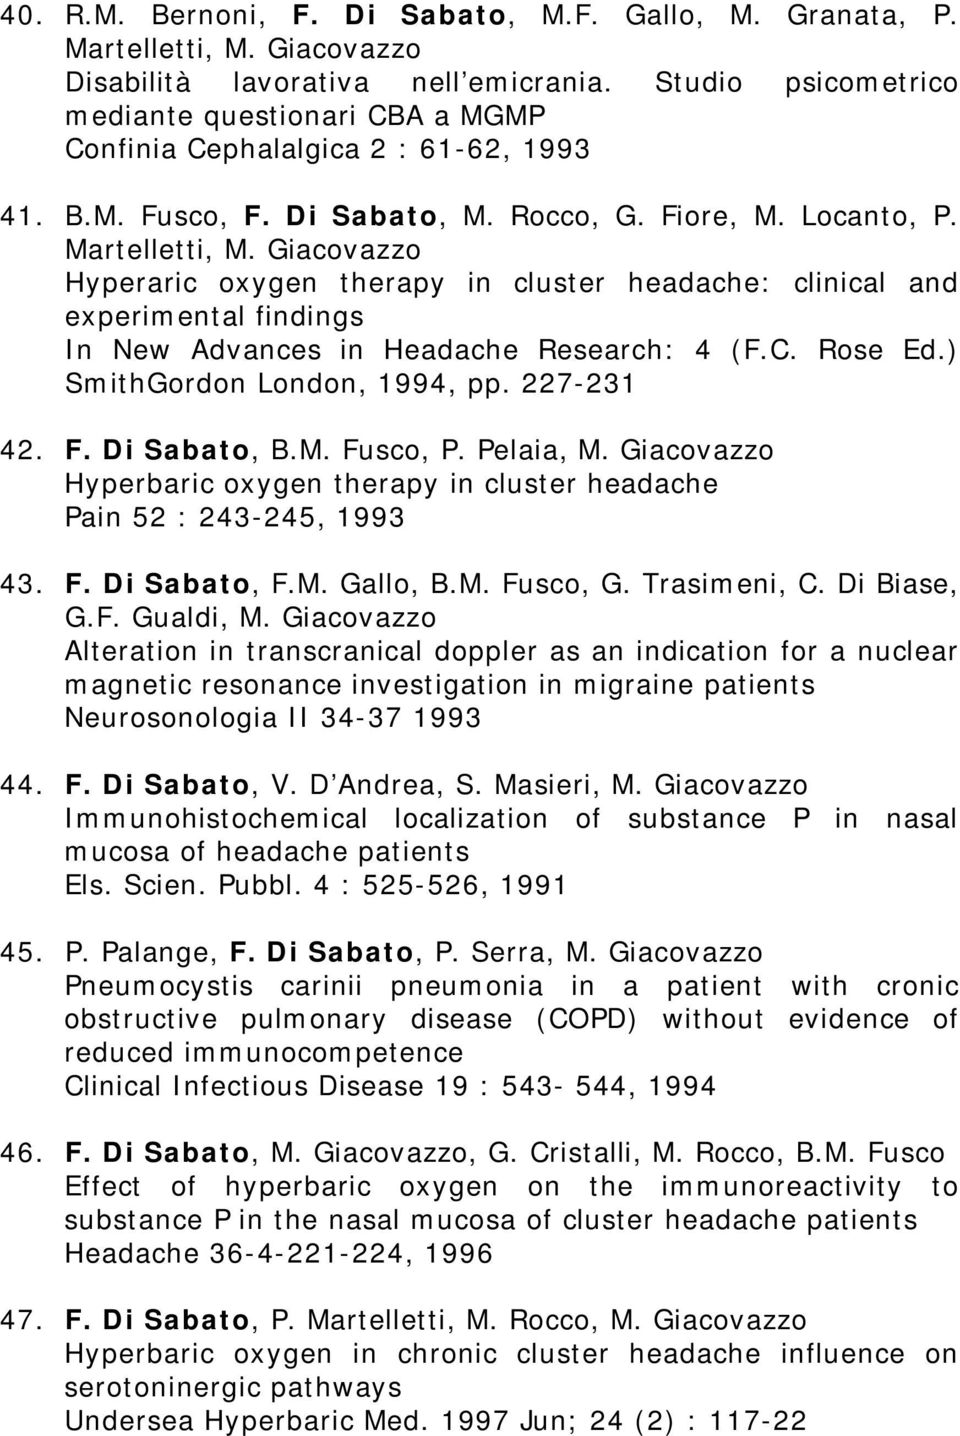 Giacovazzo Hyperaric oxygen therapy in cluster headache: clinical and experimental findings In New Advances in Headache Research: 4 (F.C. Rose Ed.) SmithGordon London, 1994, pp. 227-231 42. F.